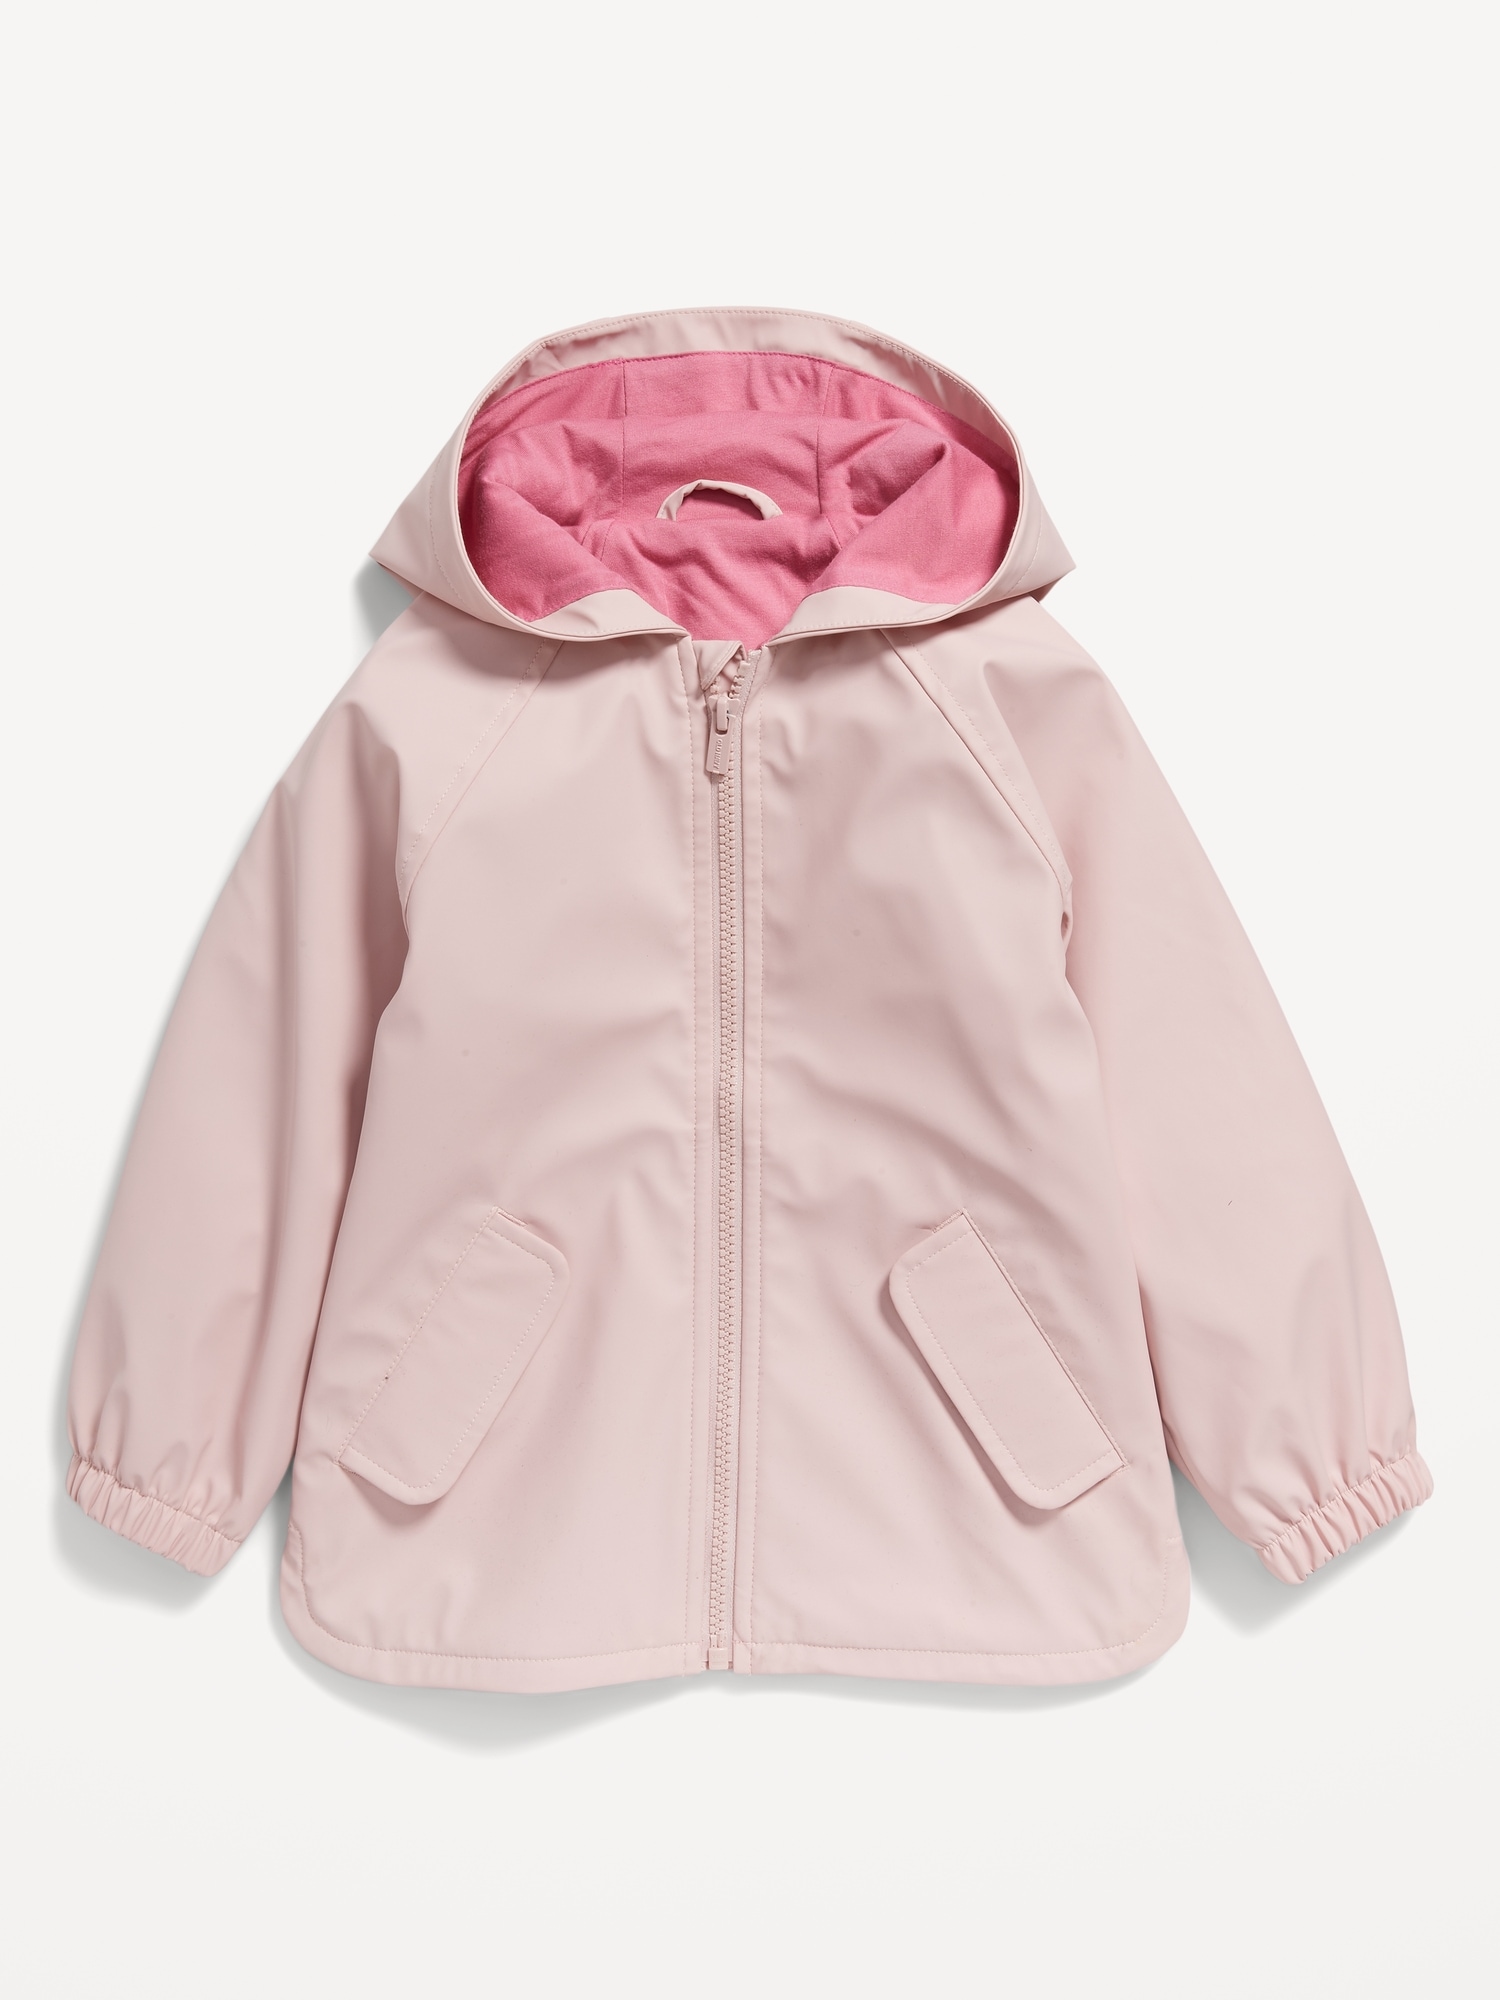 Water-Resistant Hooded Jacket for Toddler Girls | Old Navy